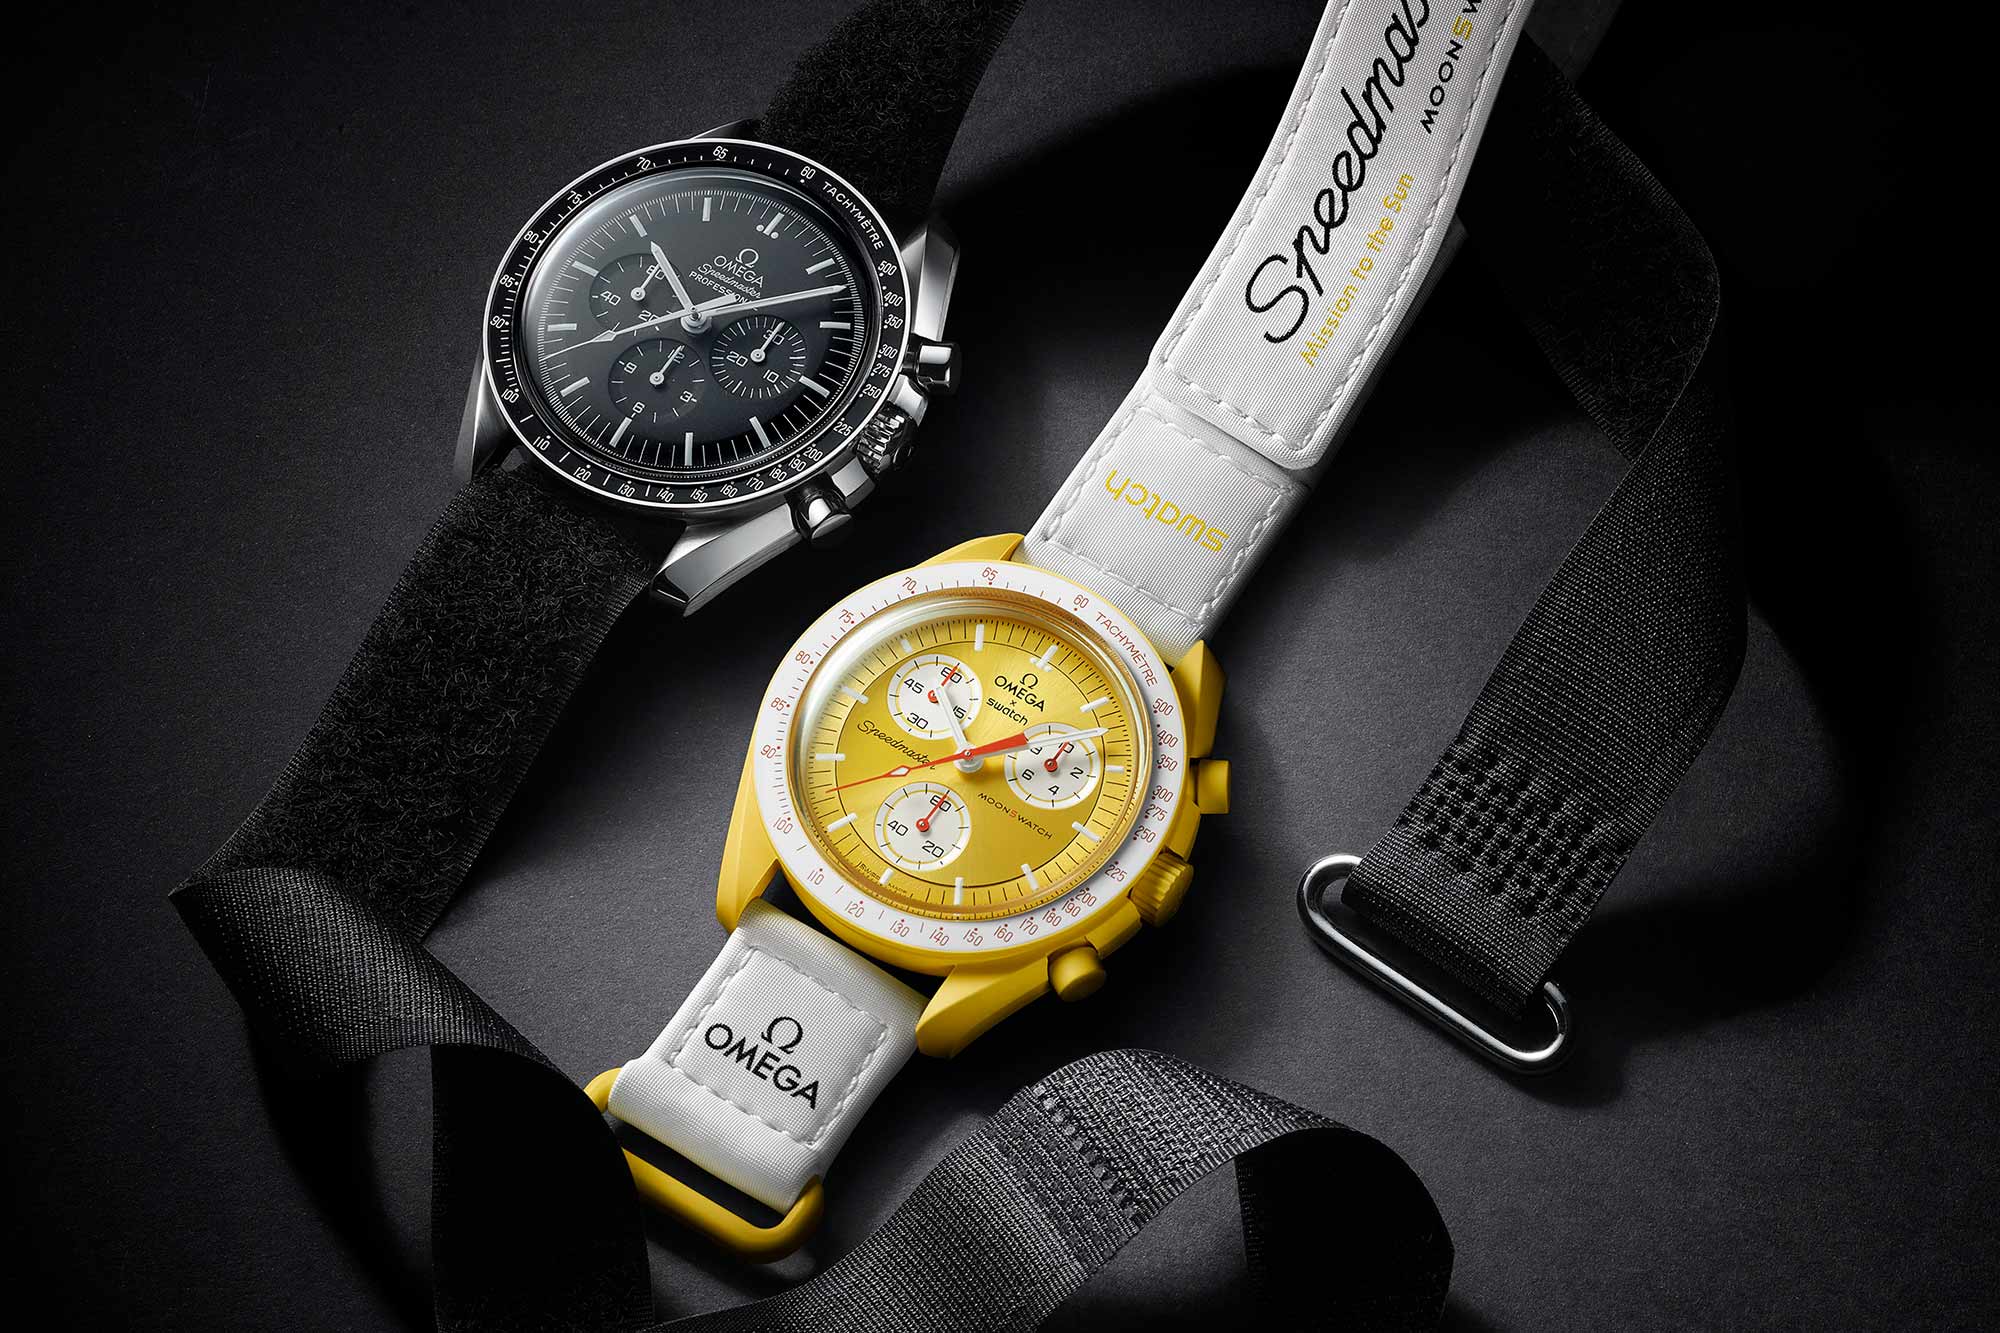 What You Need To Know About The OMEGA X SWATCH: BIOCERAMIC 